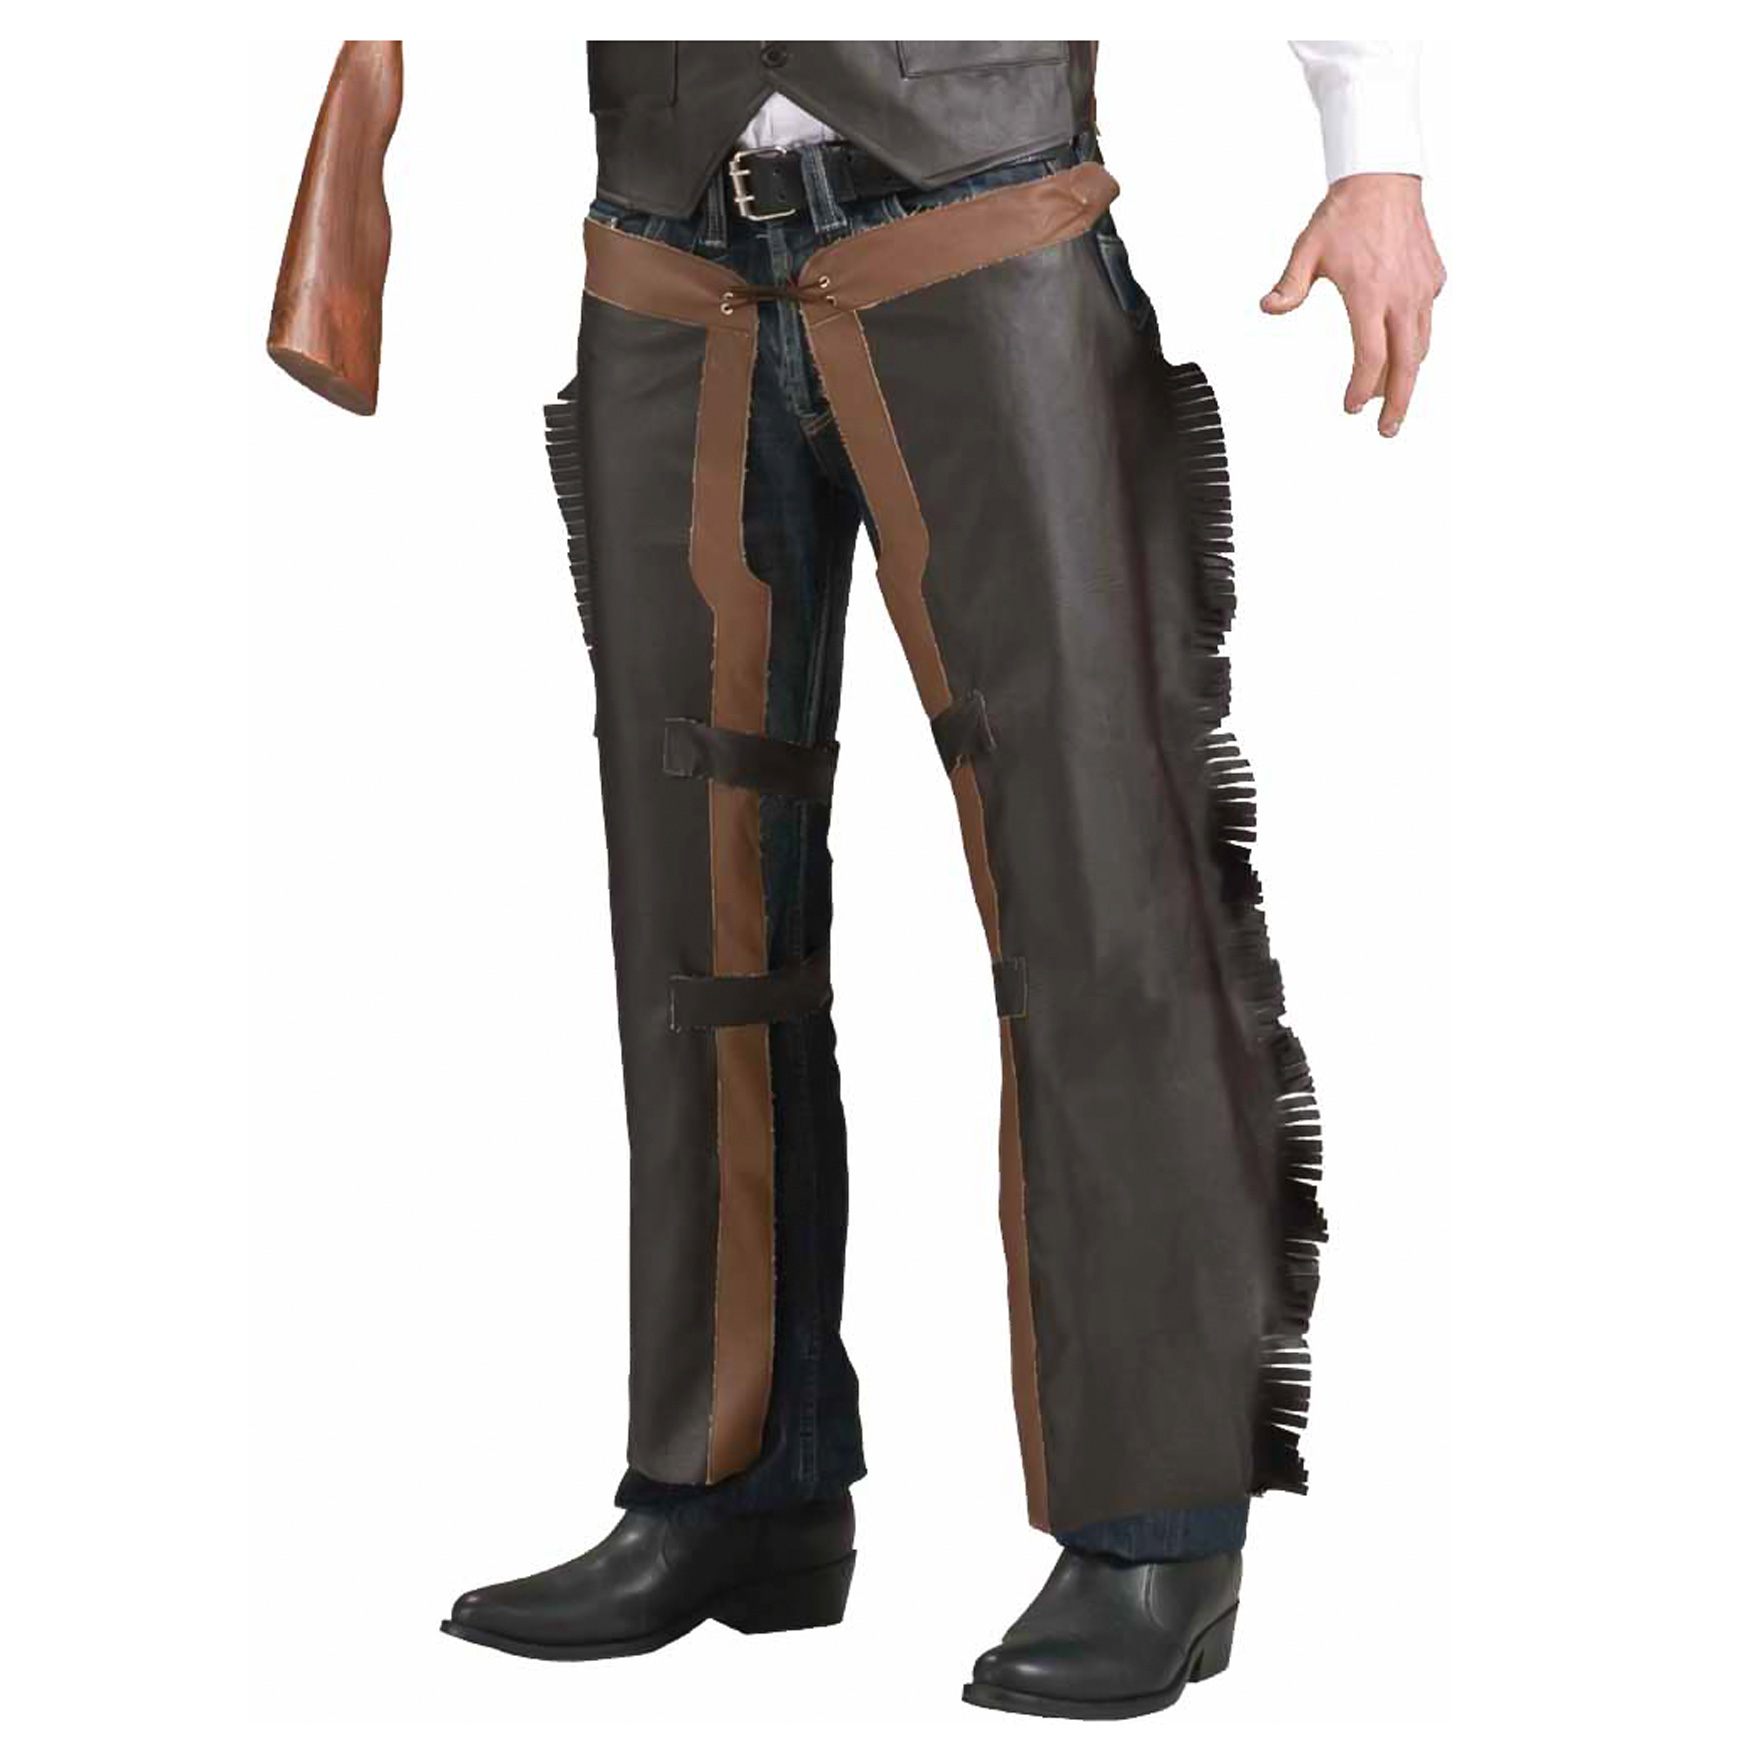 Cowboy ADULT Faux Leather Western Costume Chaps Lone Ranger Brown | eBay